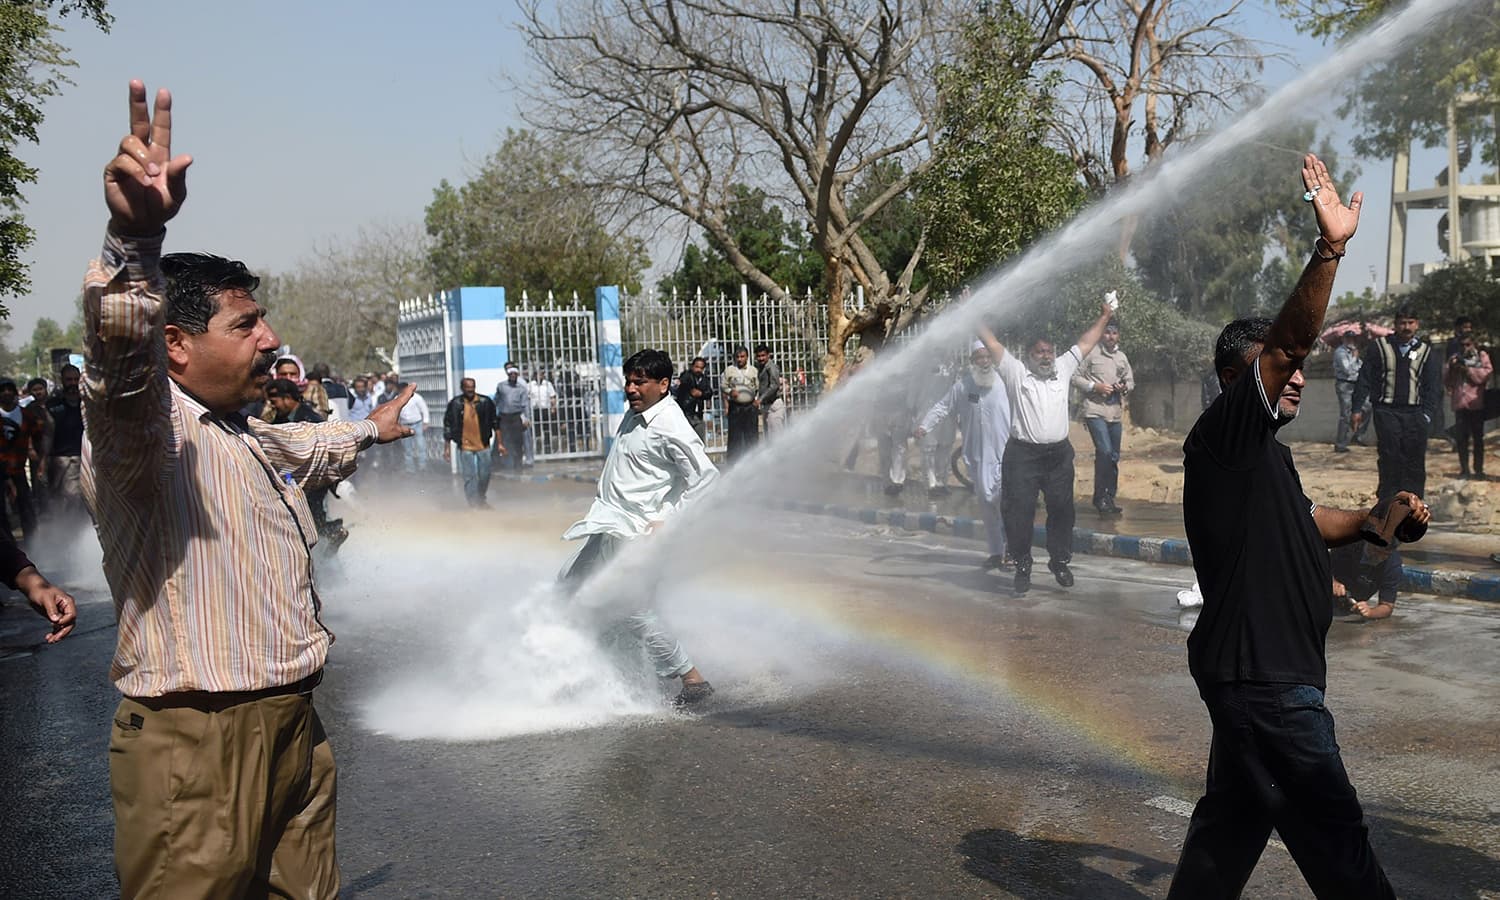 Pakistani employees of Pakistan International Airlines (PIA) shout slogans as police use a water cannon on them during a protest near Karachi International Airport in Karachi on February 2, 2016. Two demonstrators were shot dead and several more were wounded at Karachi's international airport when clashes broke out between security forces and staff from the national airline protesting privatisation plans, officials said. AFP PHOTO / RIZWAN TABASSUM